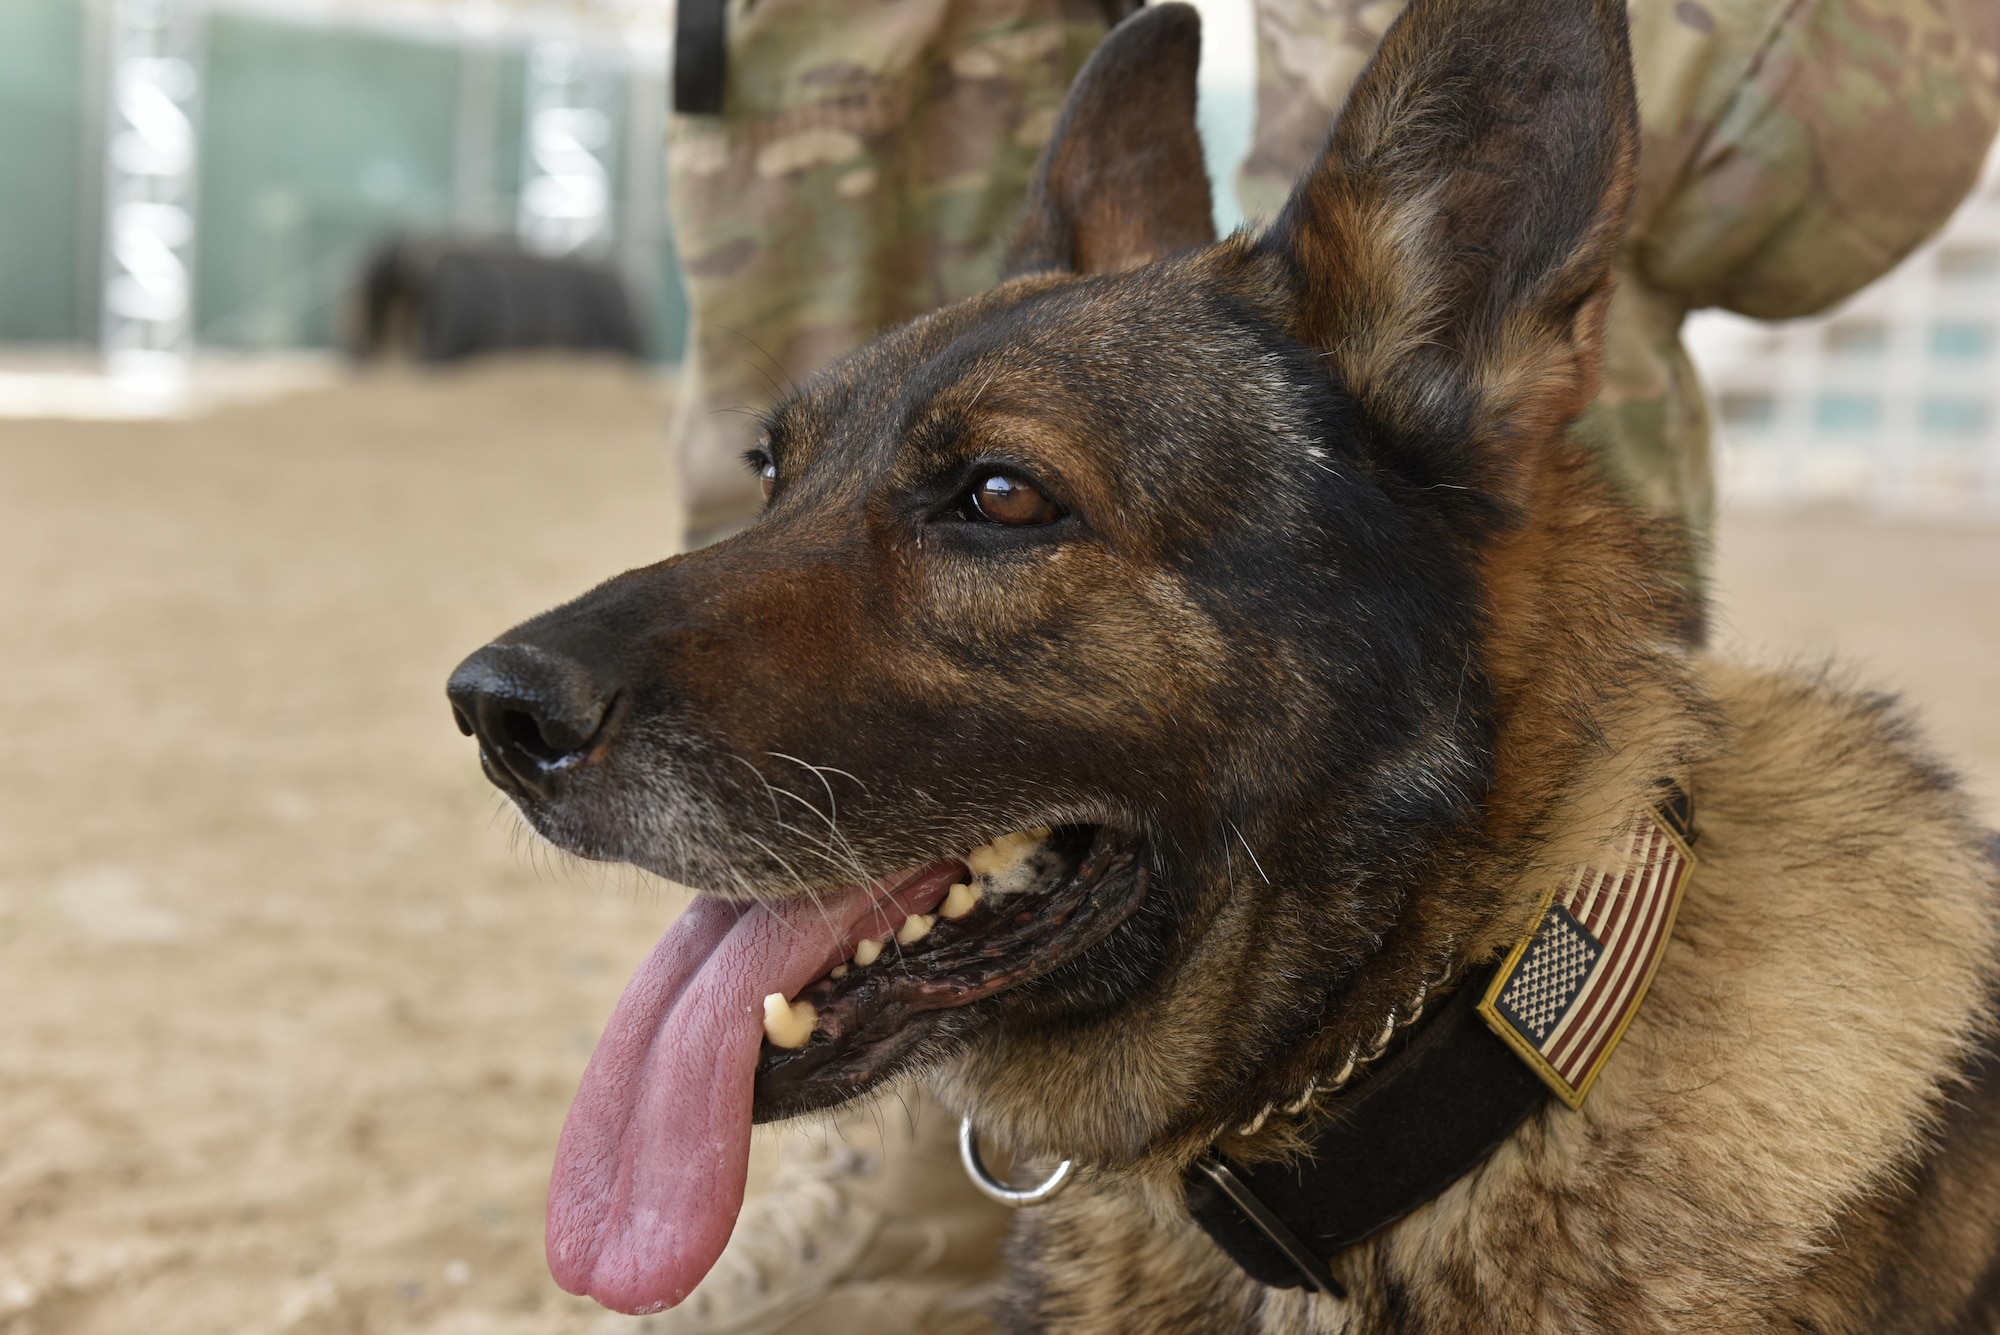 Egon, 407th Expeditionary Security Forces Squadron military working dog, rests after an obsticle course training exercise May 23, 2017, at the 407th Air Expeditionary Group in Southwest Asia. Egon's handler is Senior Airman Carlton Isaacson, they have been partners for approximately a year and a half. (U.S. Air Force photo by Senior Airman Ramon A. Adelan)